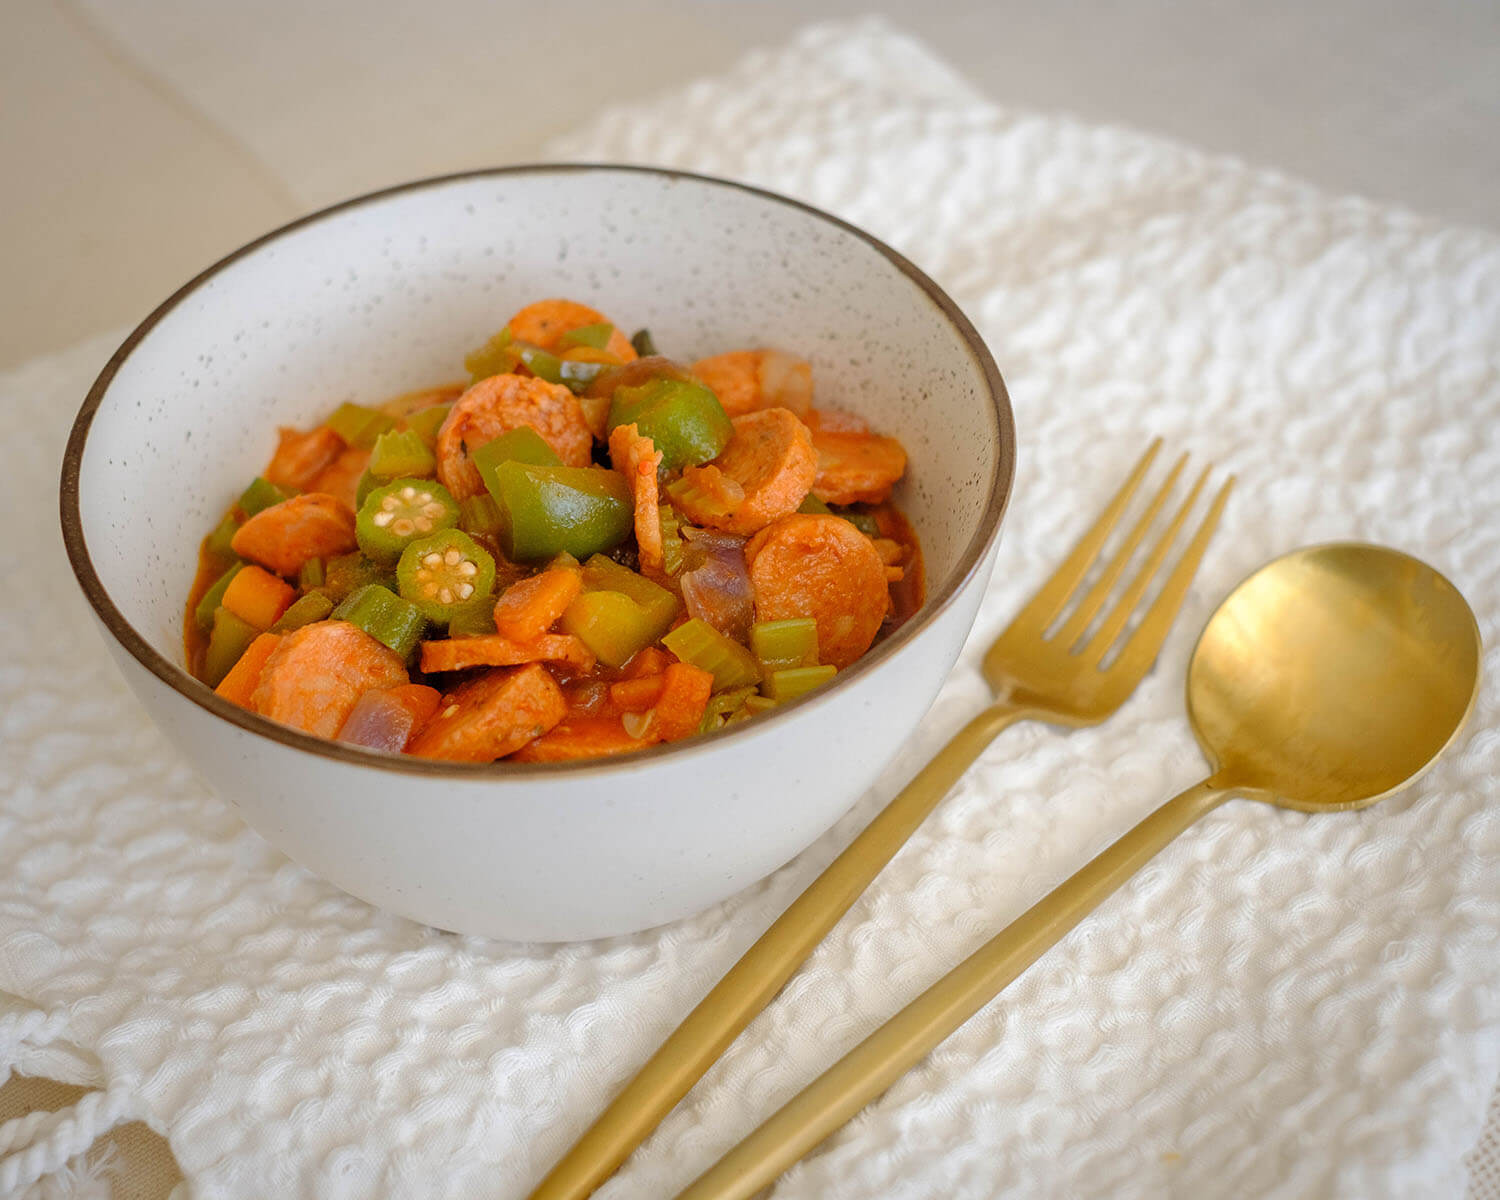 round bowl with sausage, celery, okra, in a tomato stew